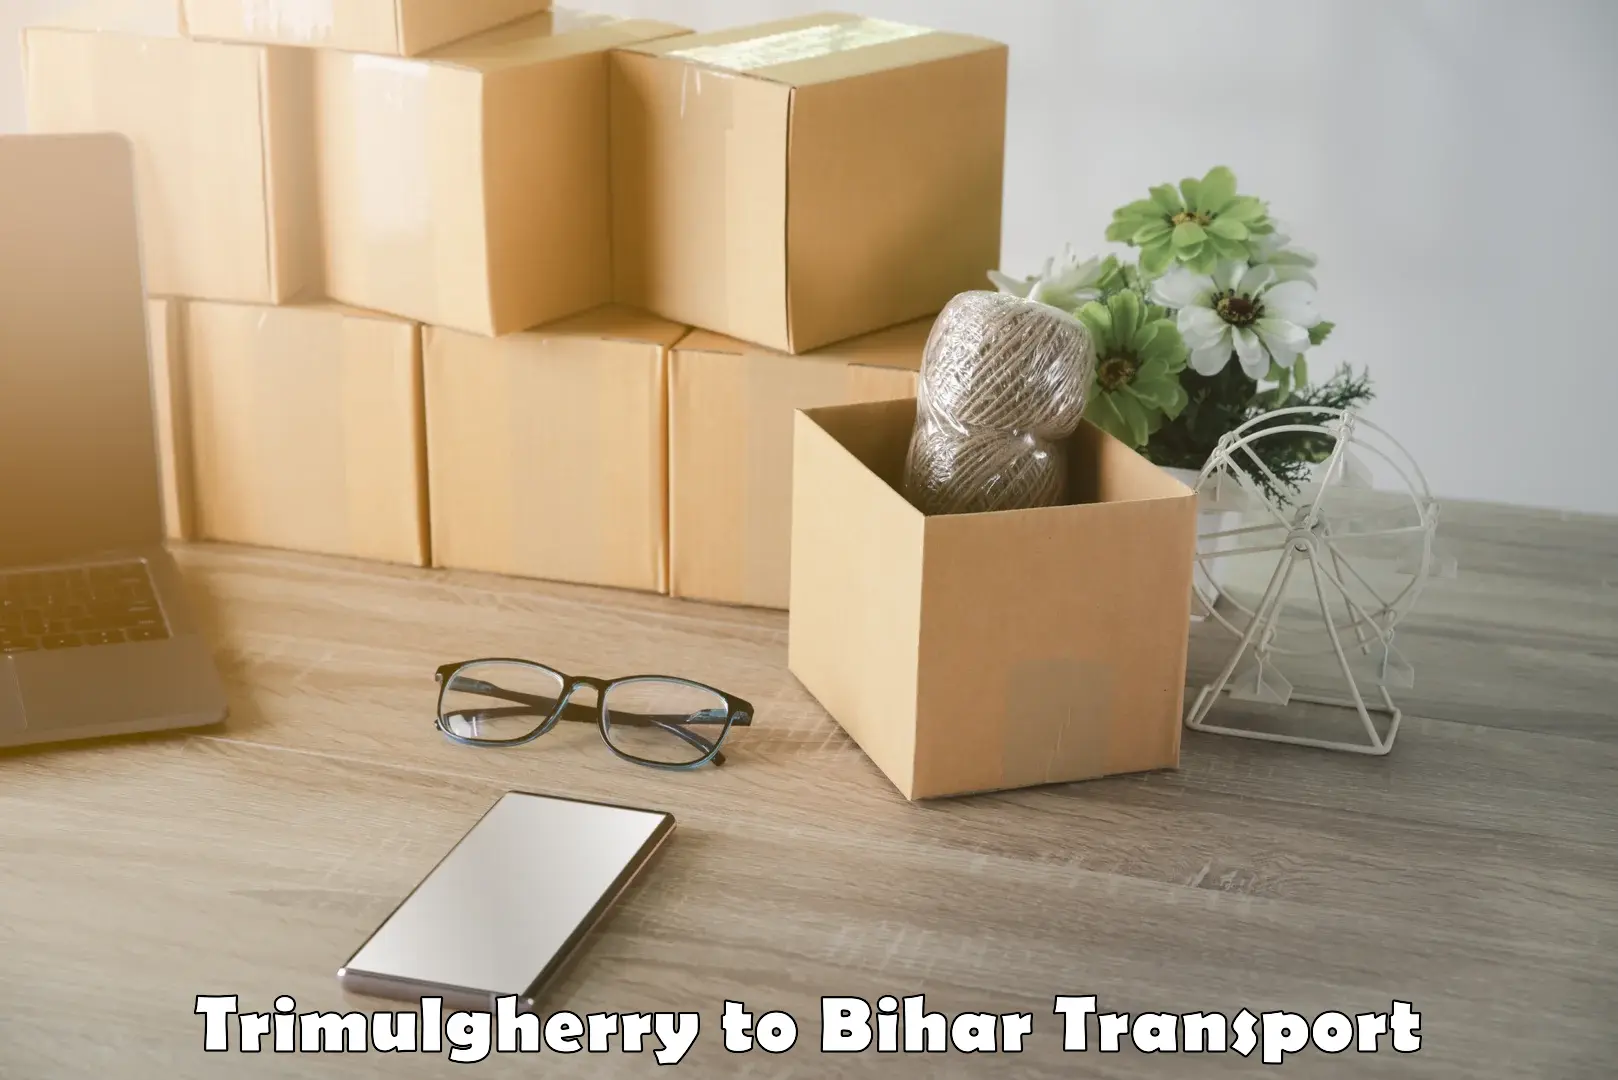 Daily transport service Trimulgherry to Bihta